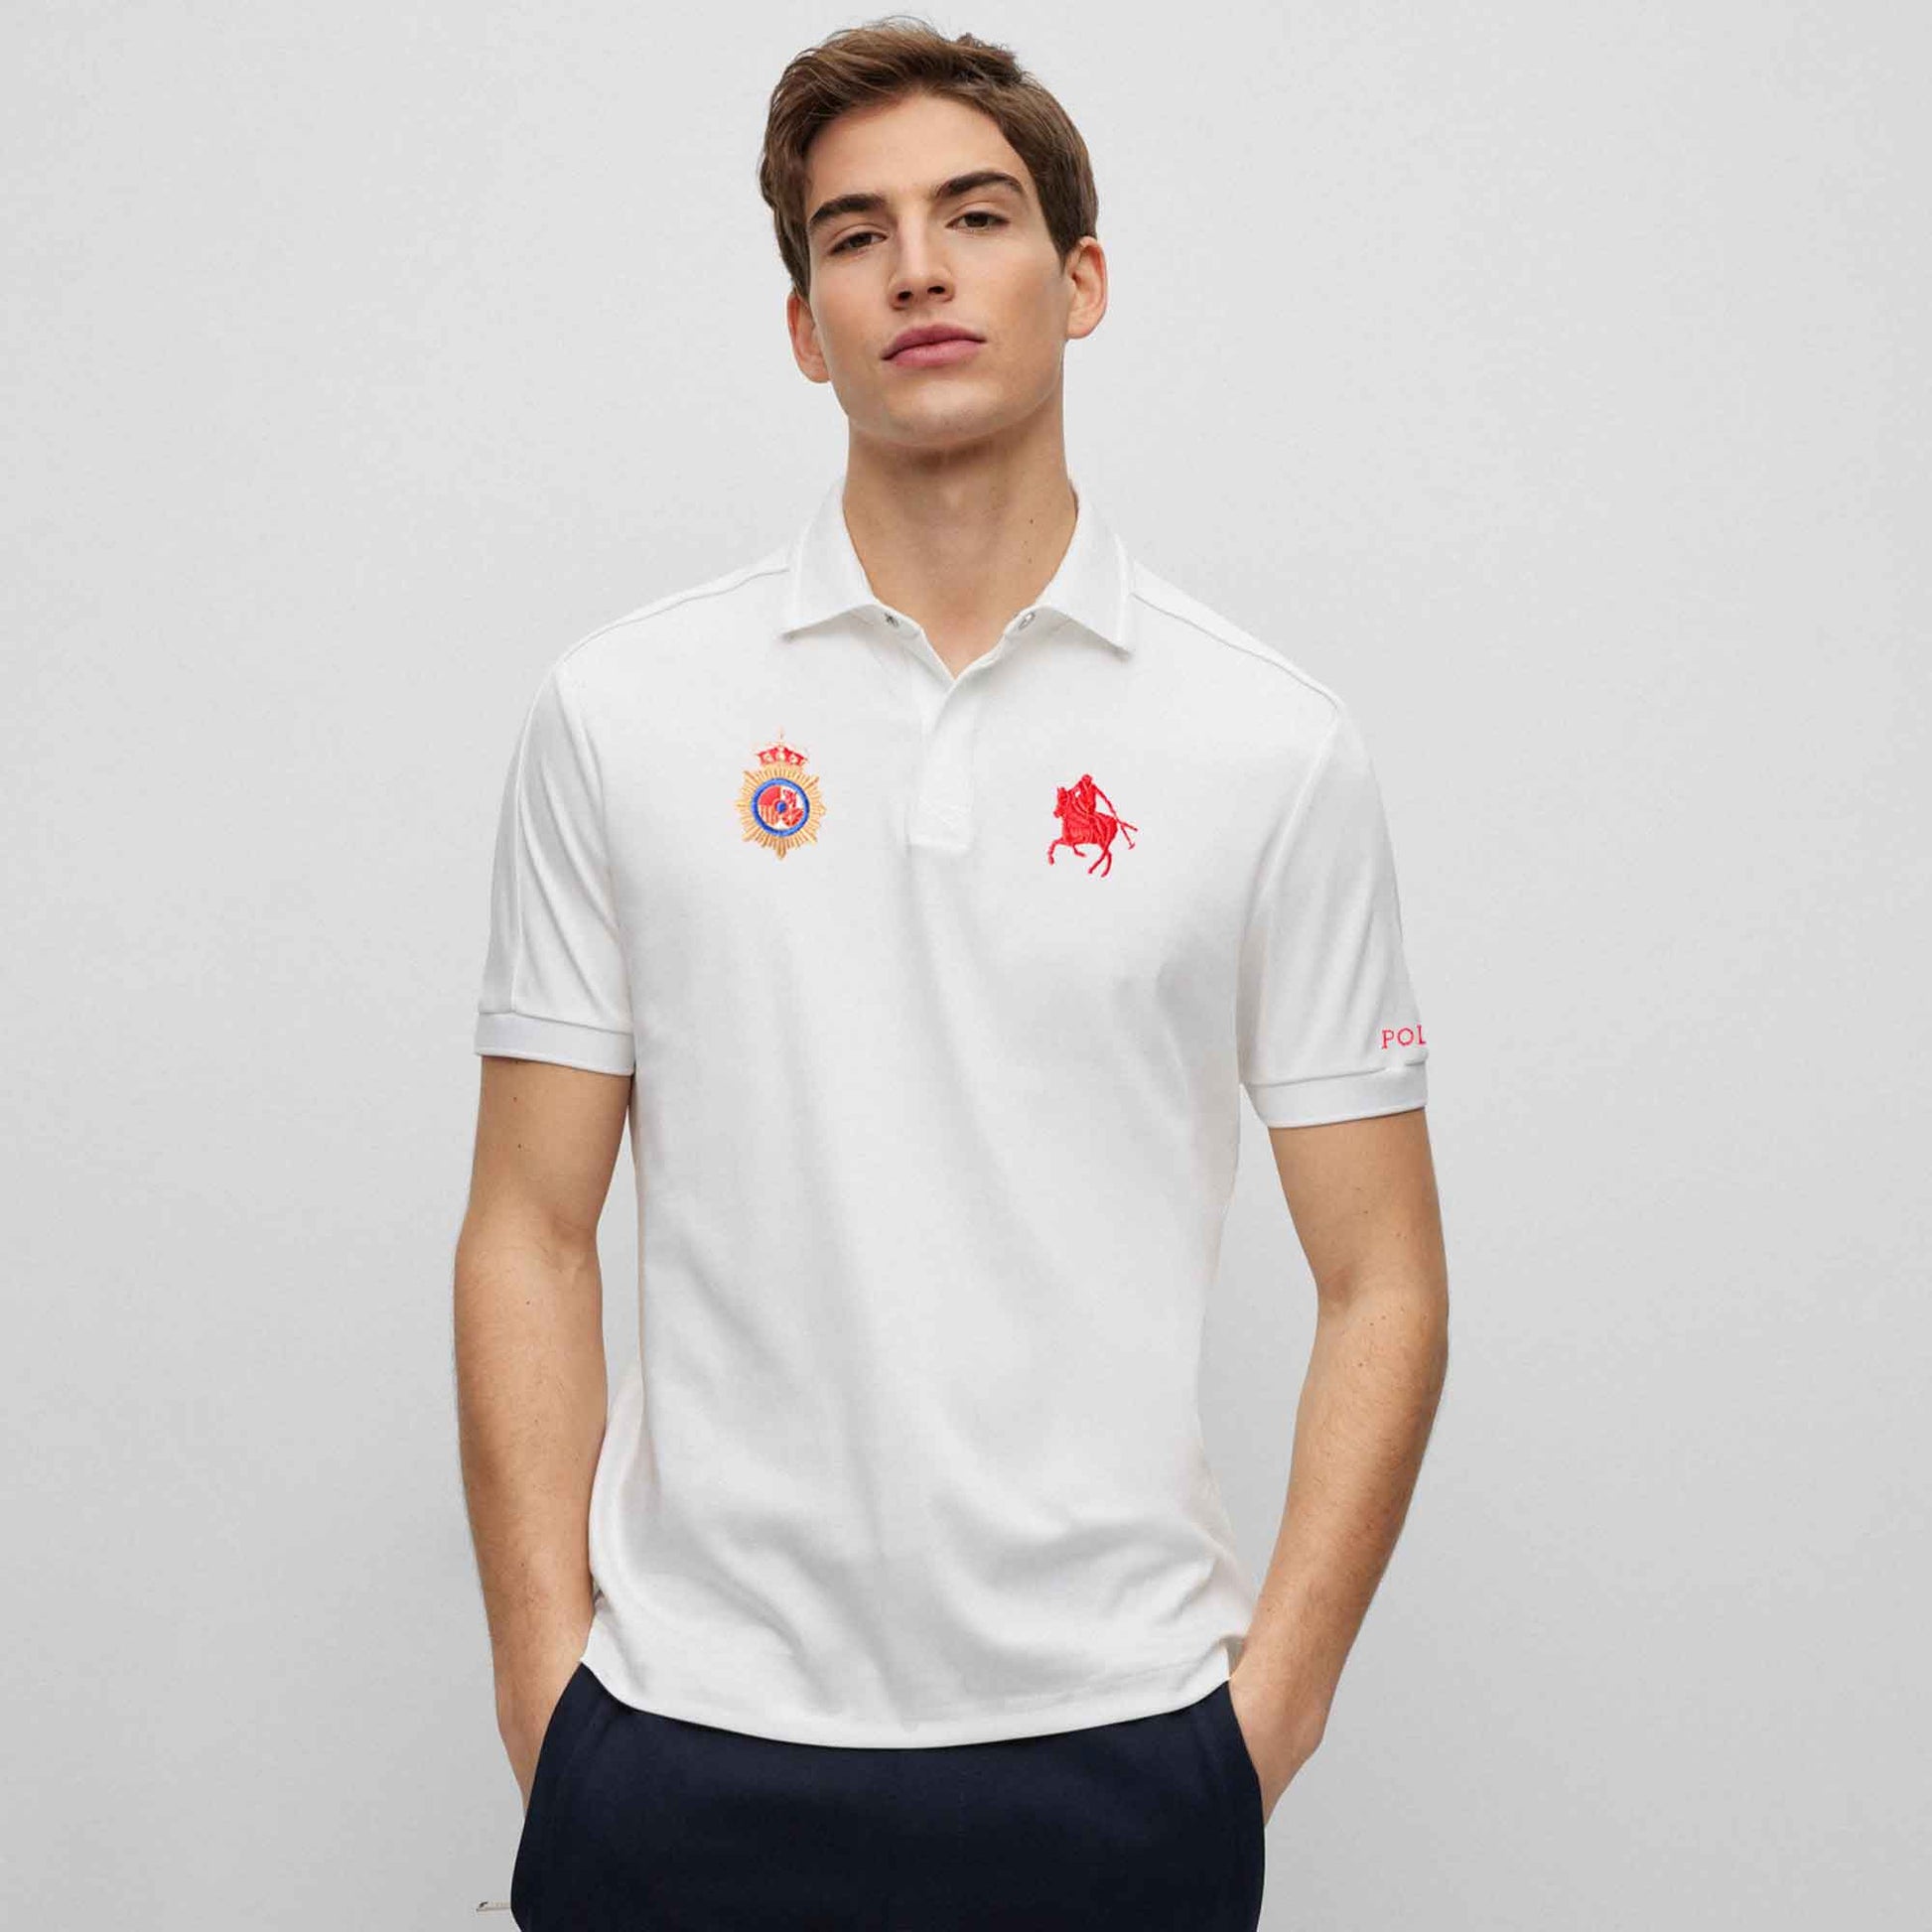 Polo Republica Men's Horse Rider & Crown Crest Embroidered Short Sleeve Polo Shirt